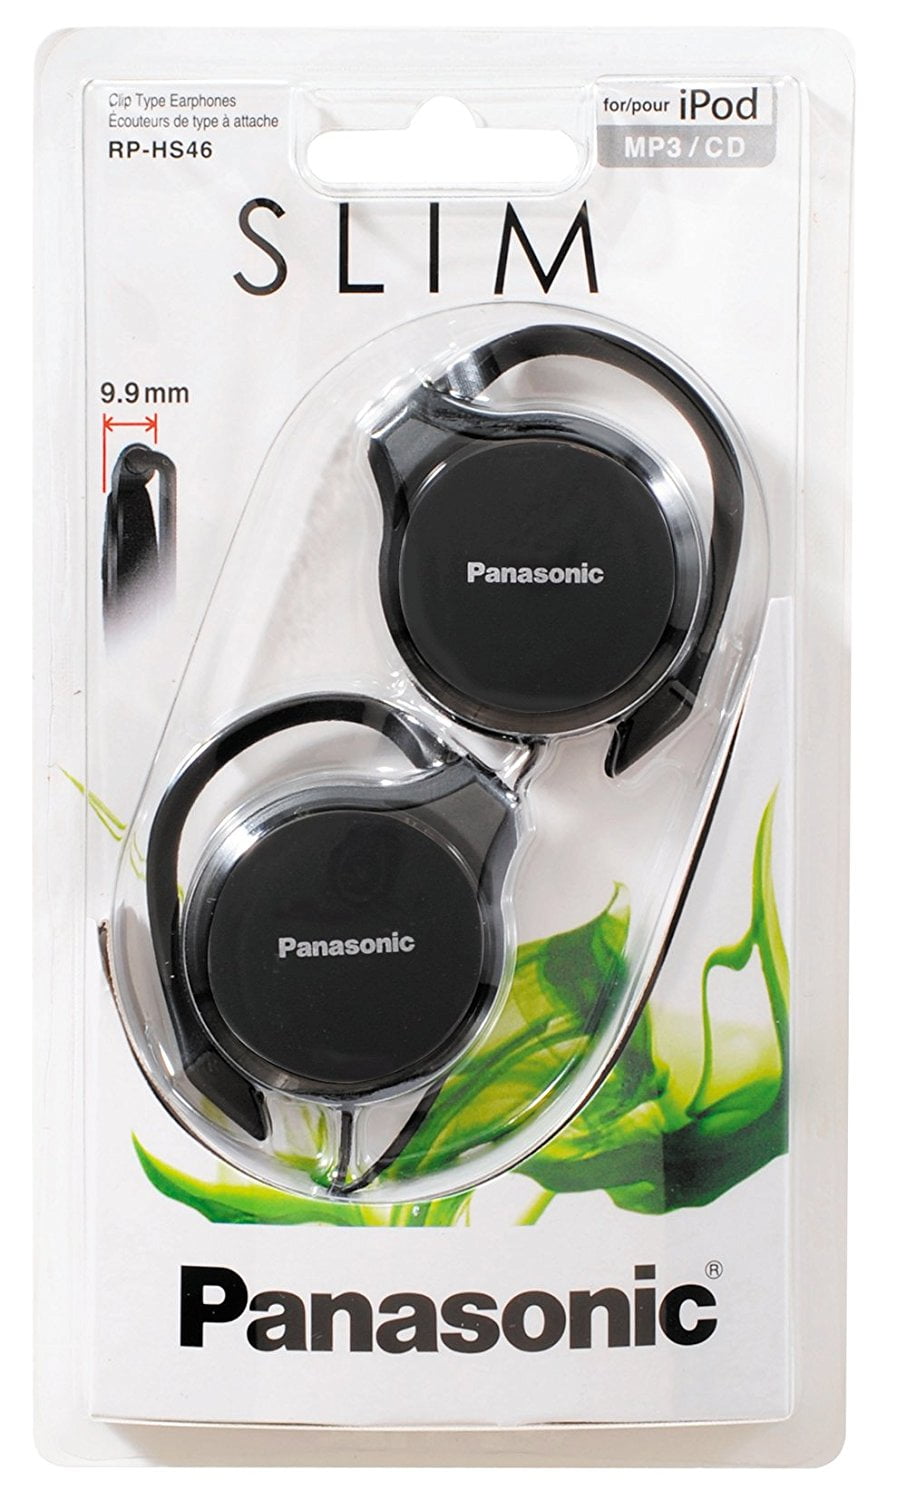 Panasonic Slim On With Housing Headphone RPHS46 Ultra Clip Wired Black Stereo Ear Lightweight